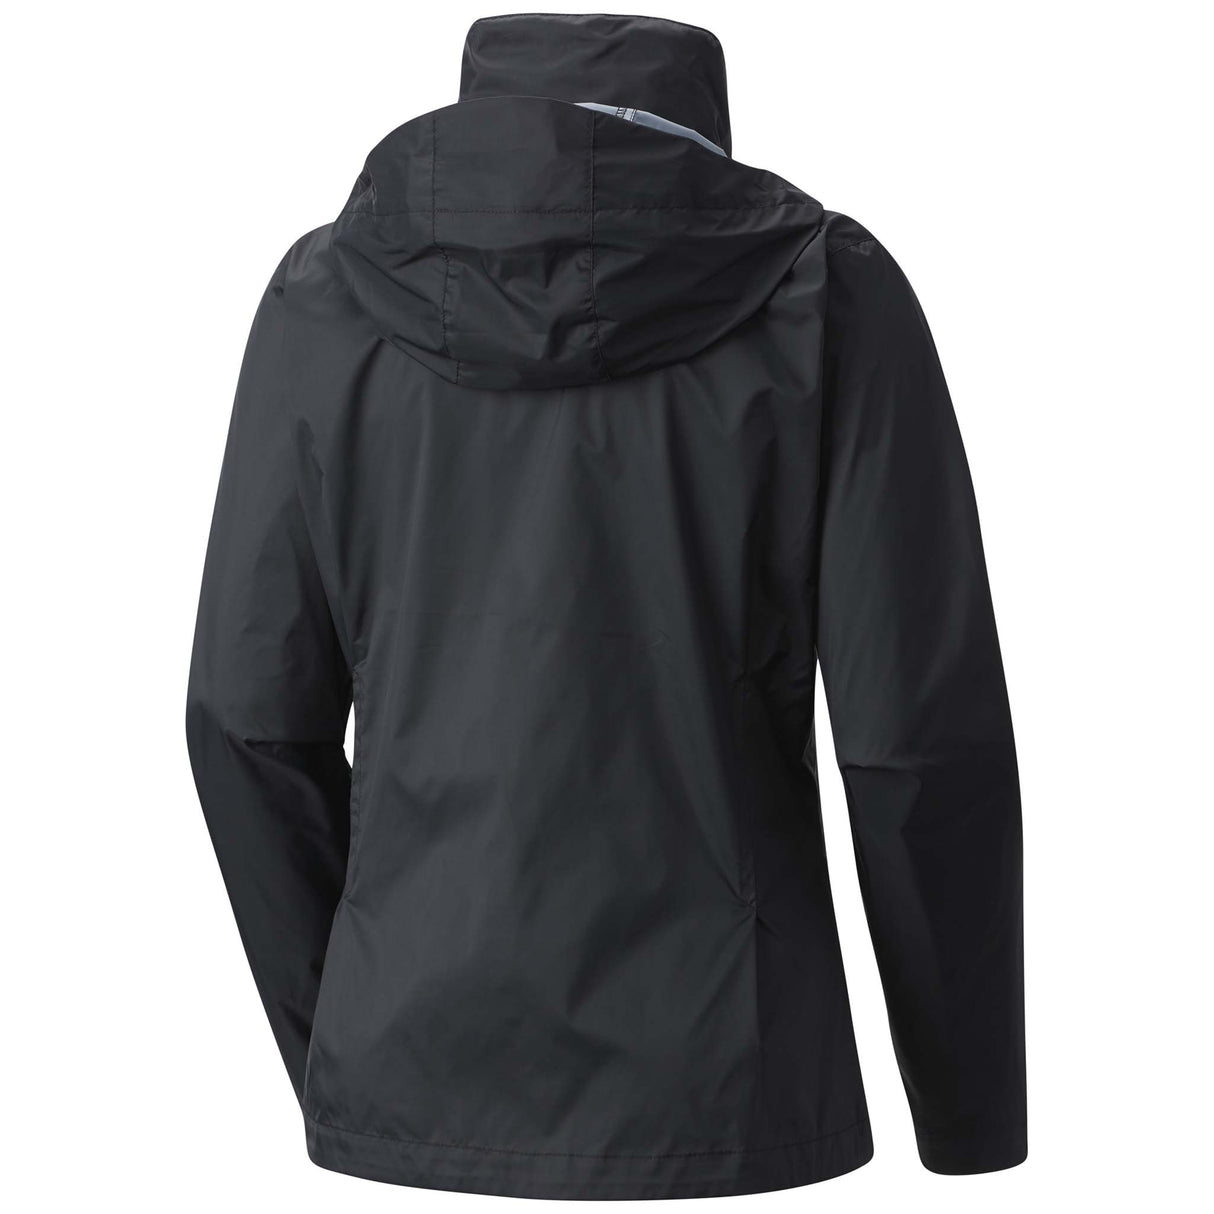 Columbia Switchback III manteau coquille noir femme dos